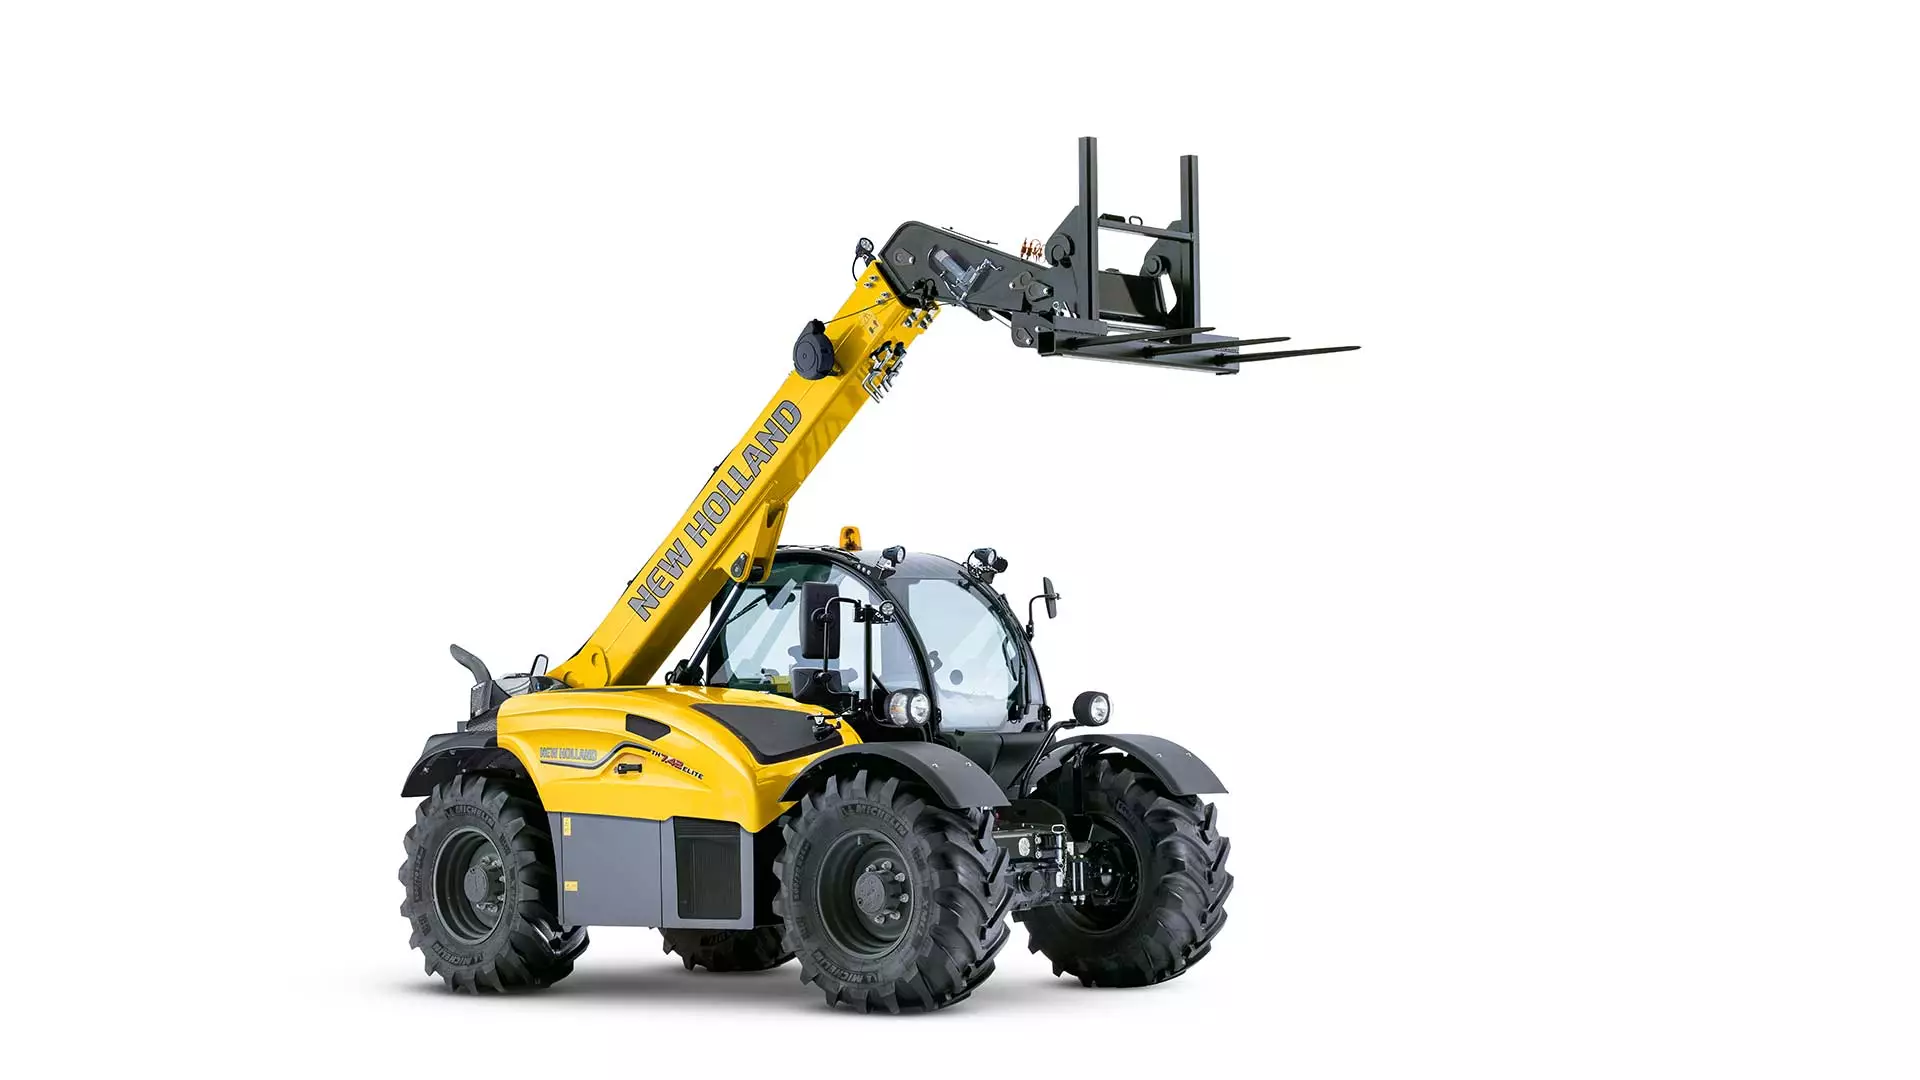 New Holland compact telehandler TH series with extended forklift arms.